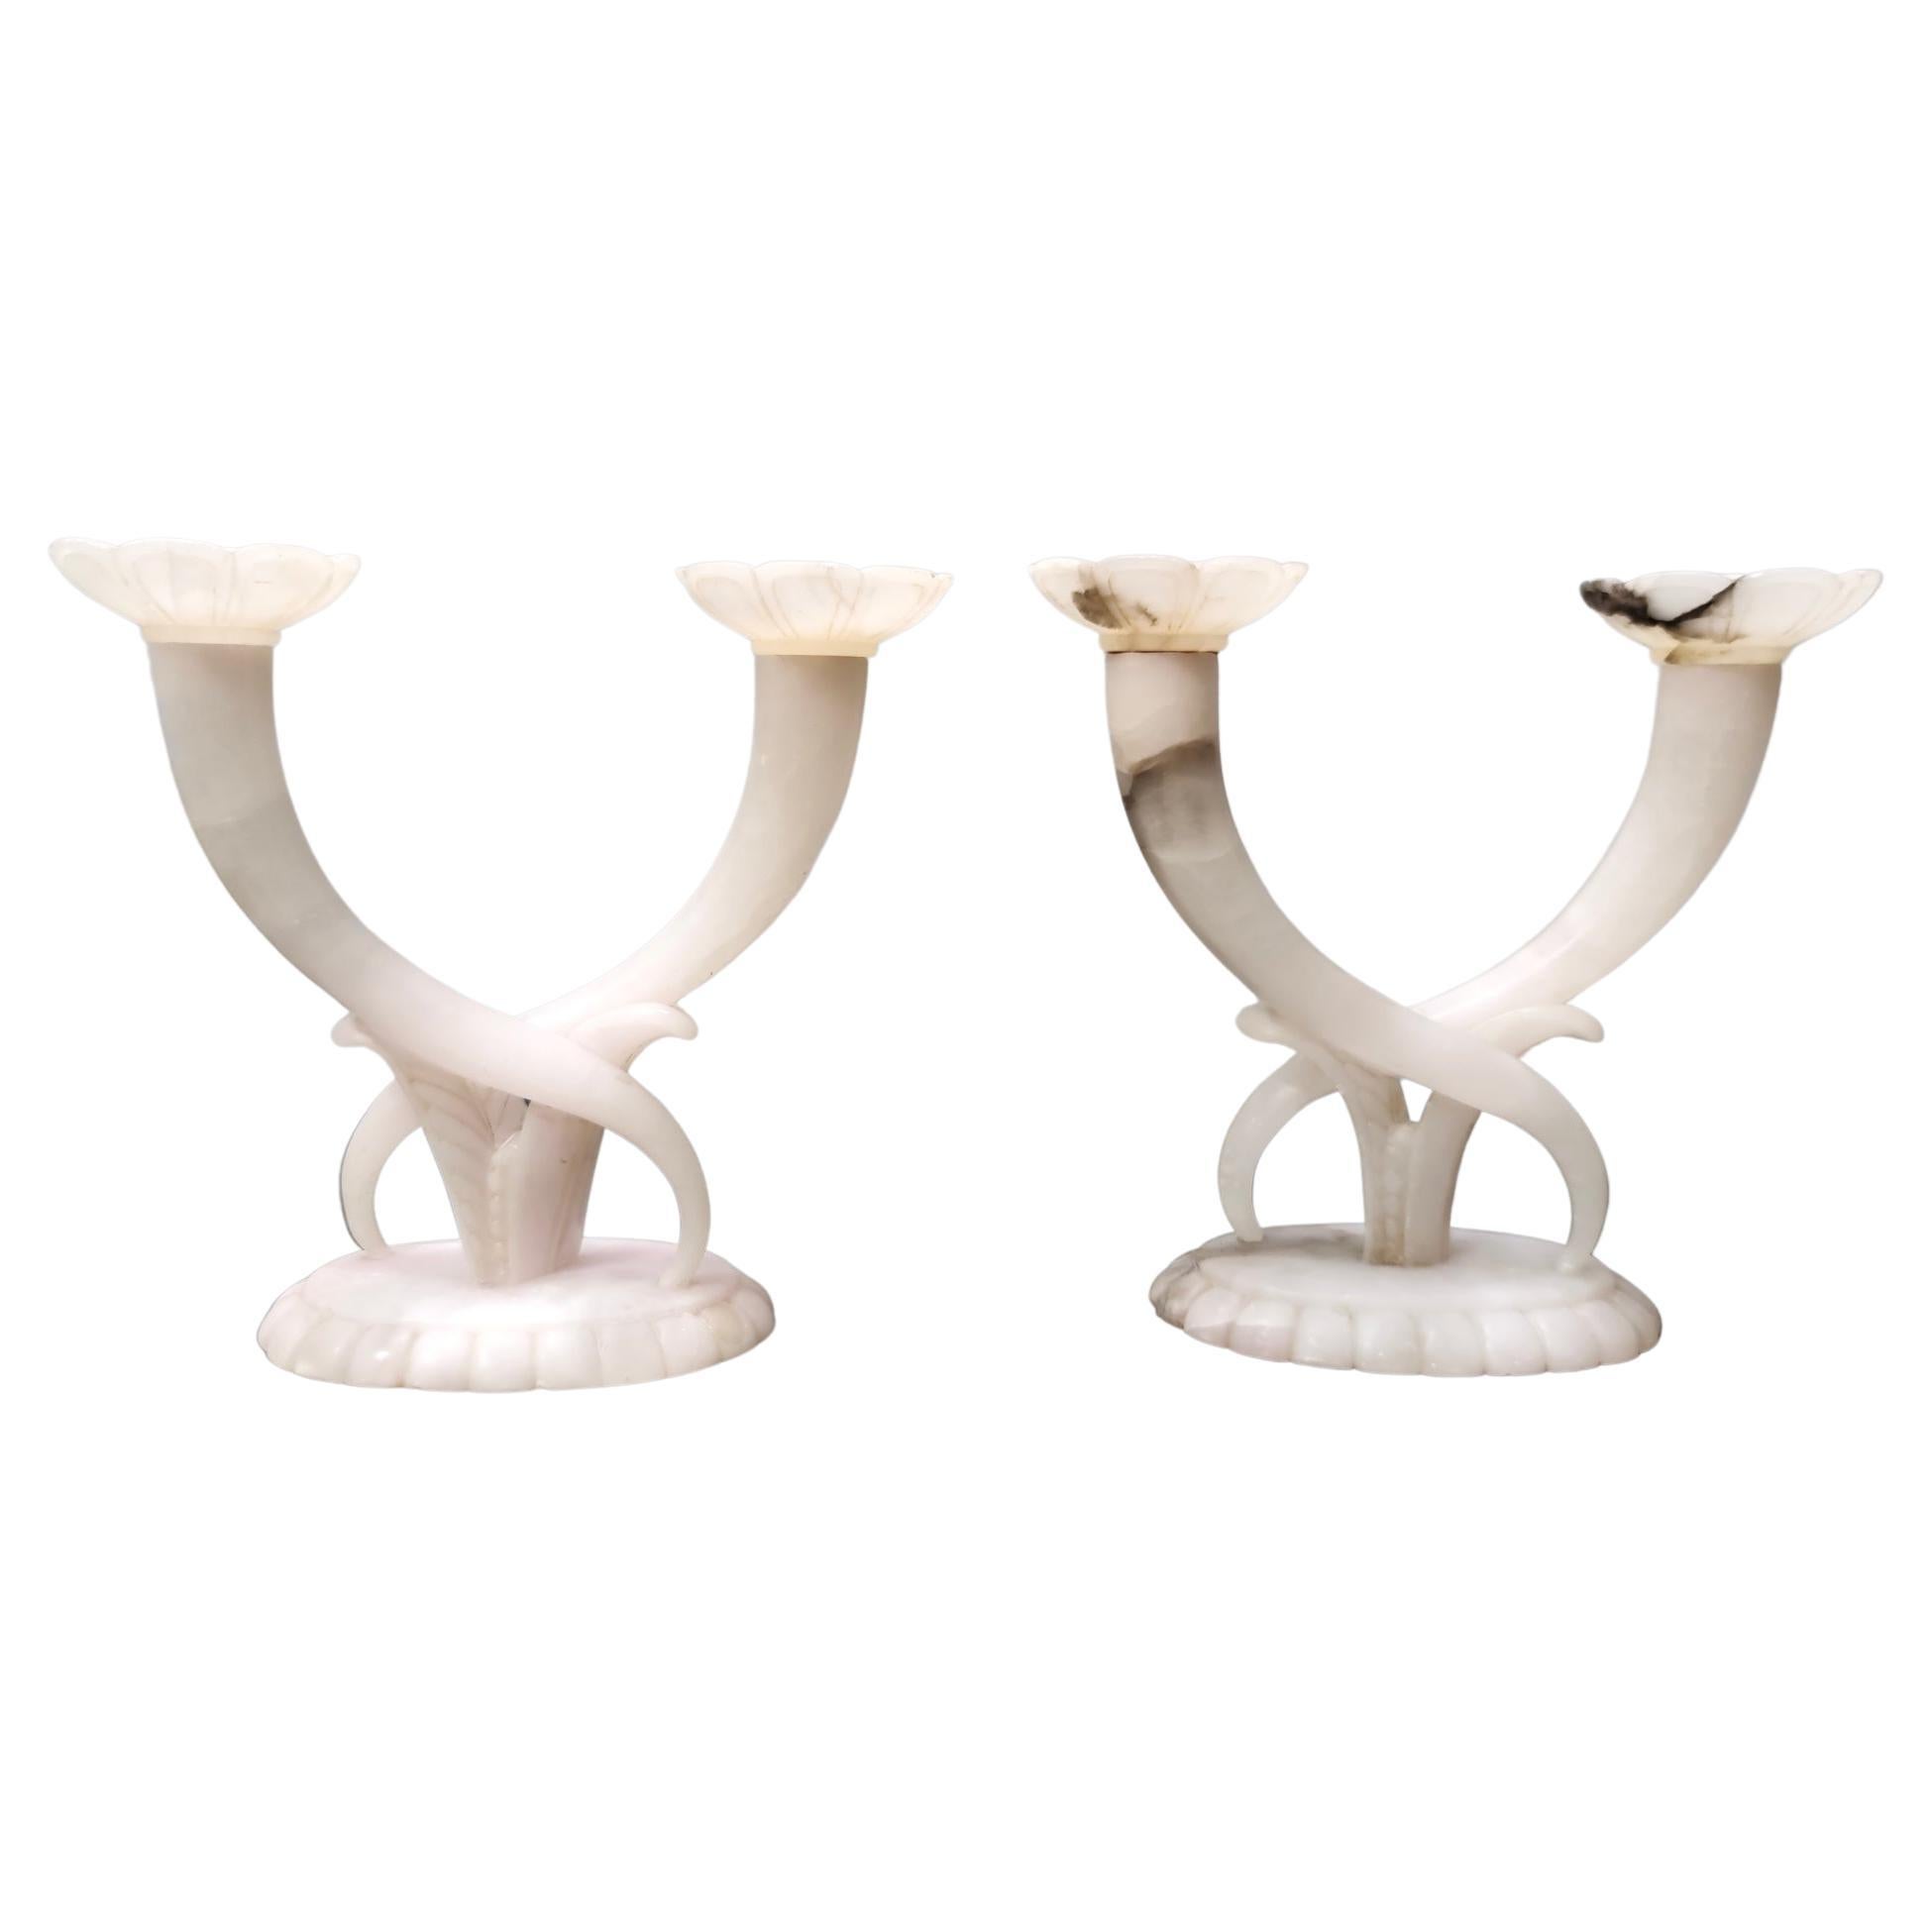 Pair of Vintage Alabaster and Onyx Candelabra Ascribable to Tomaso Buzzi, Italy